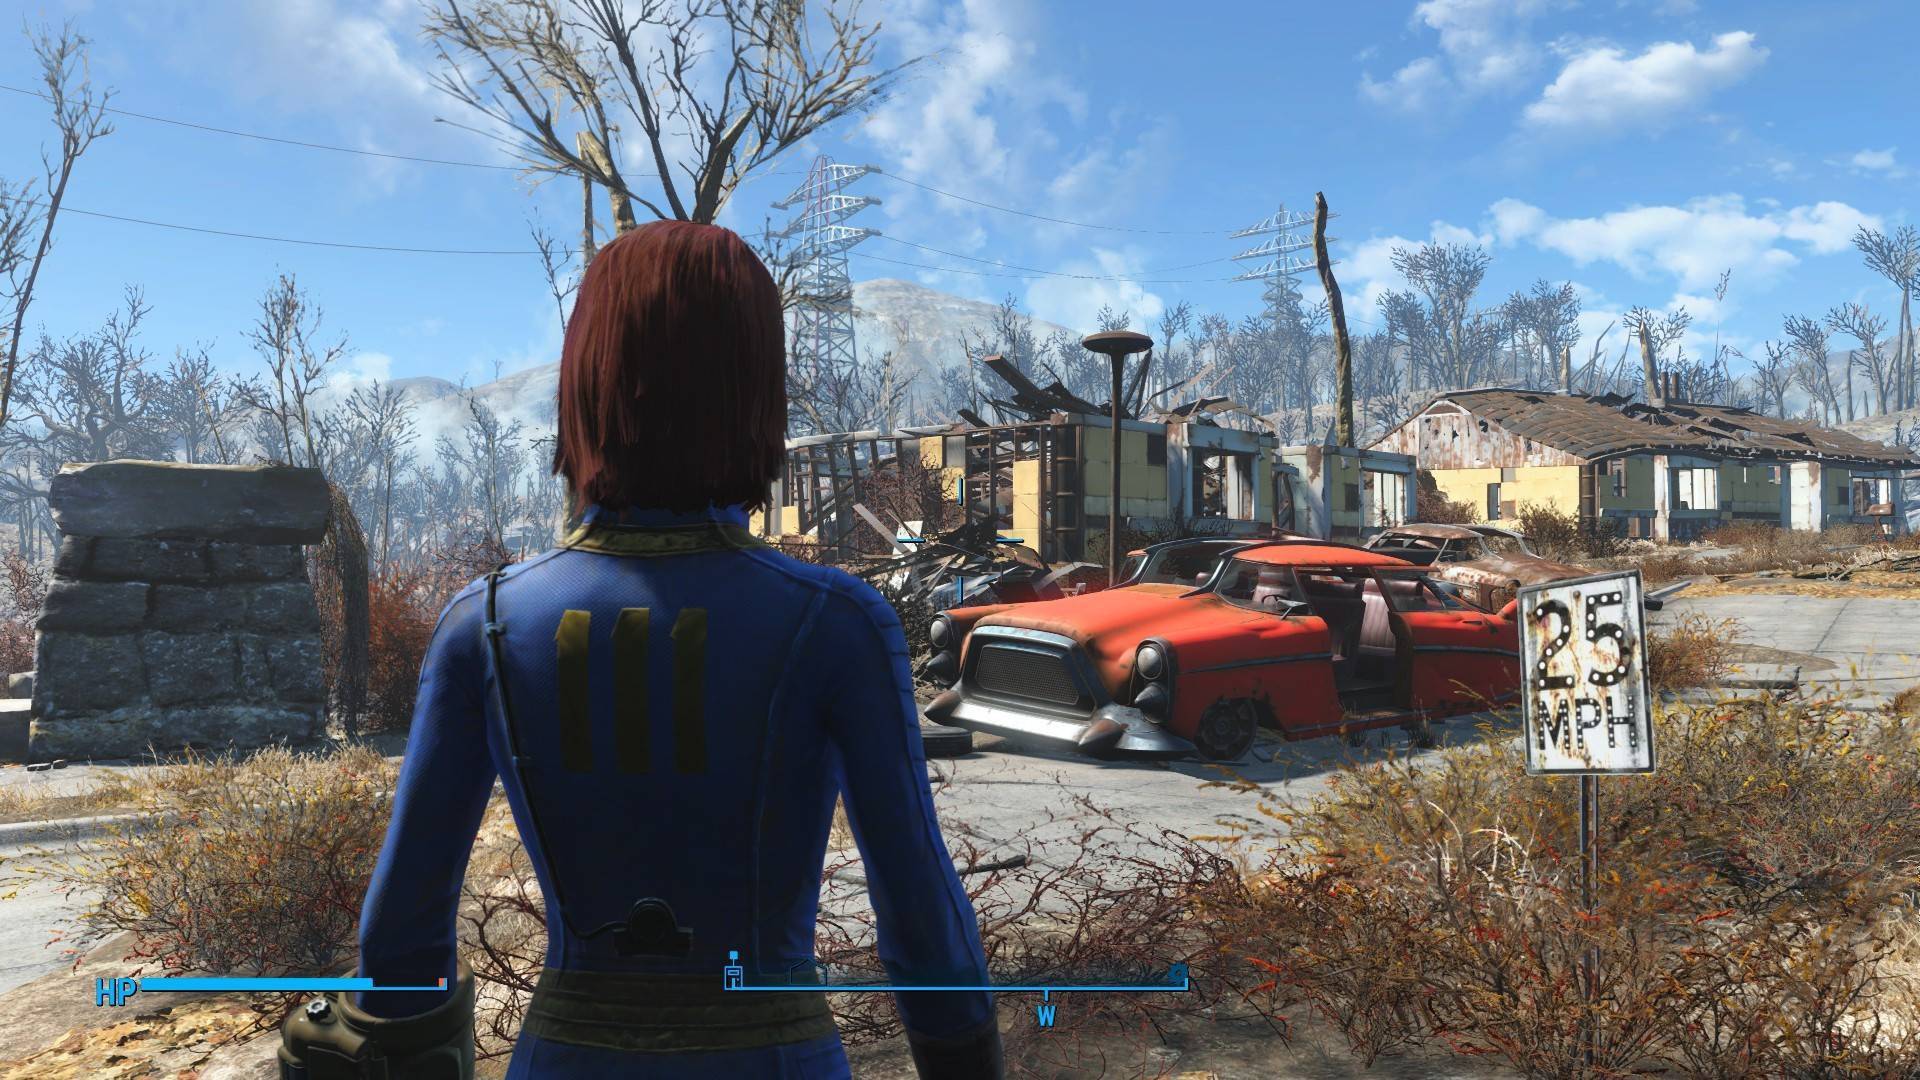 fallout 4 goty free download